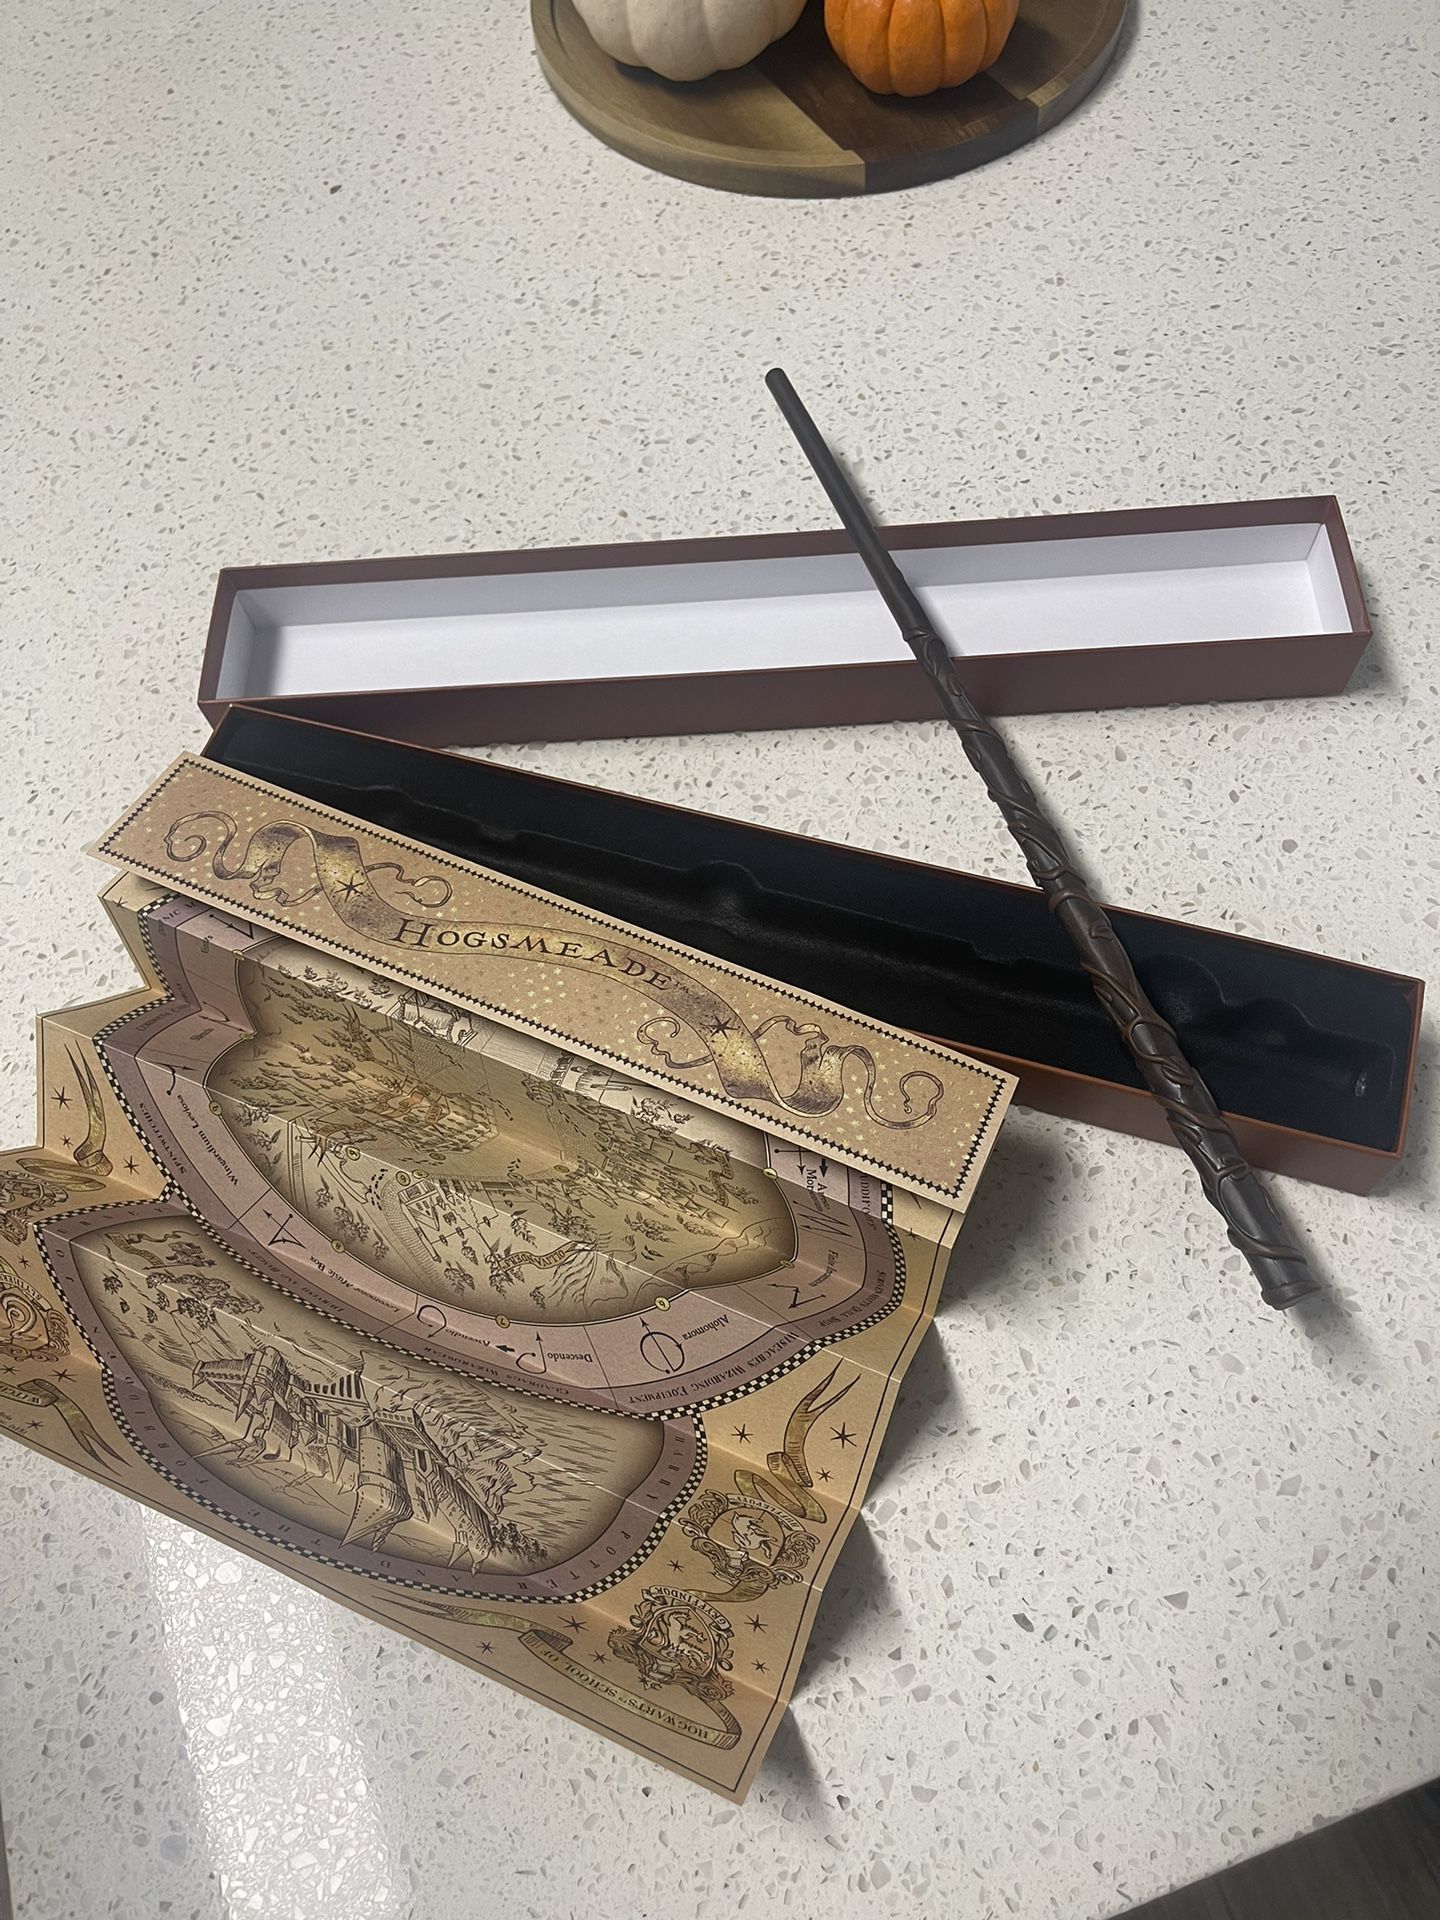 Wizarding World of Harry Potter Hermione Granger Interactive Wand